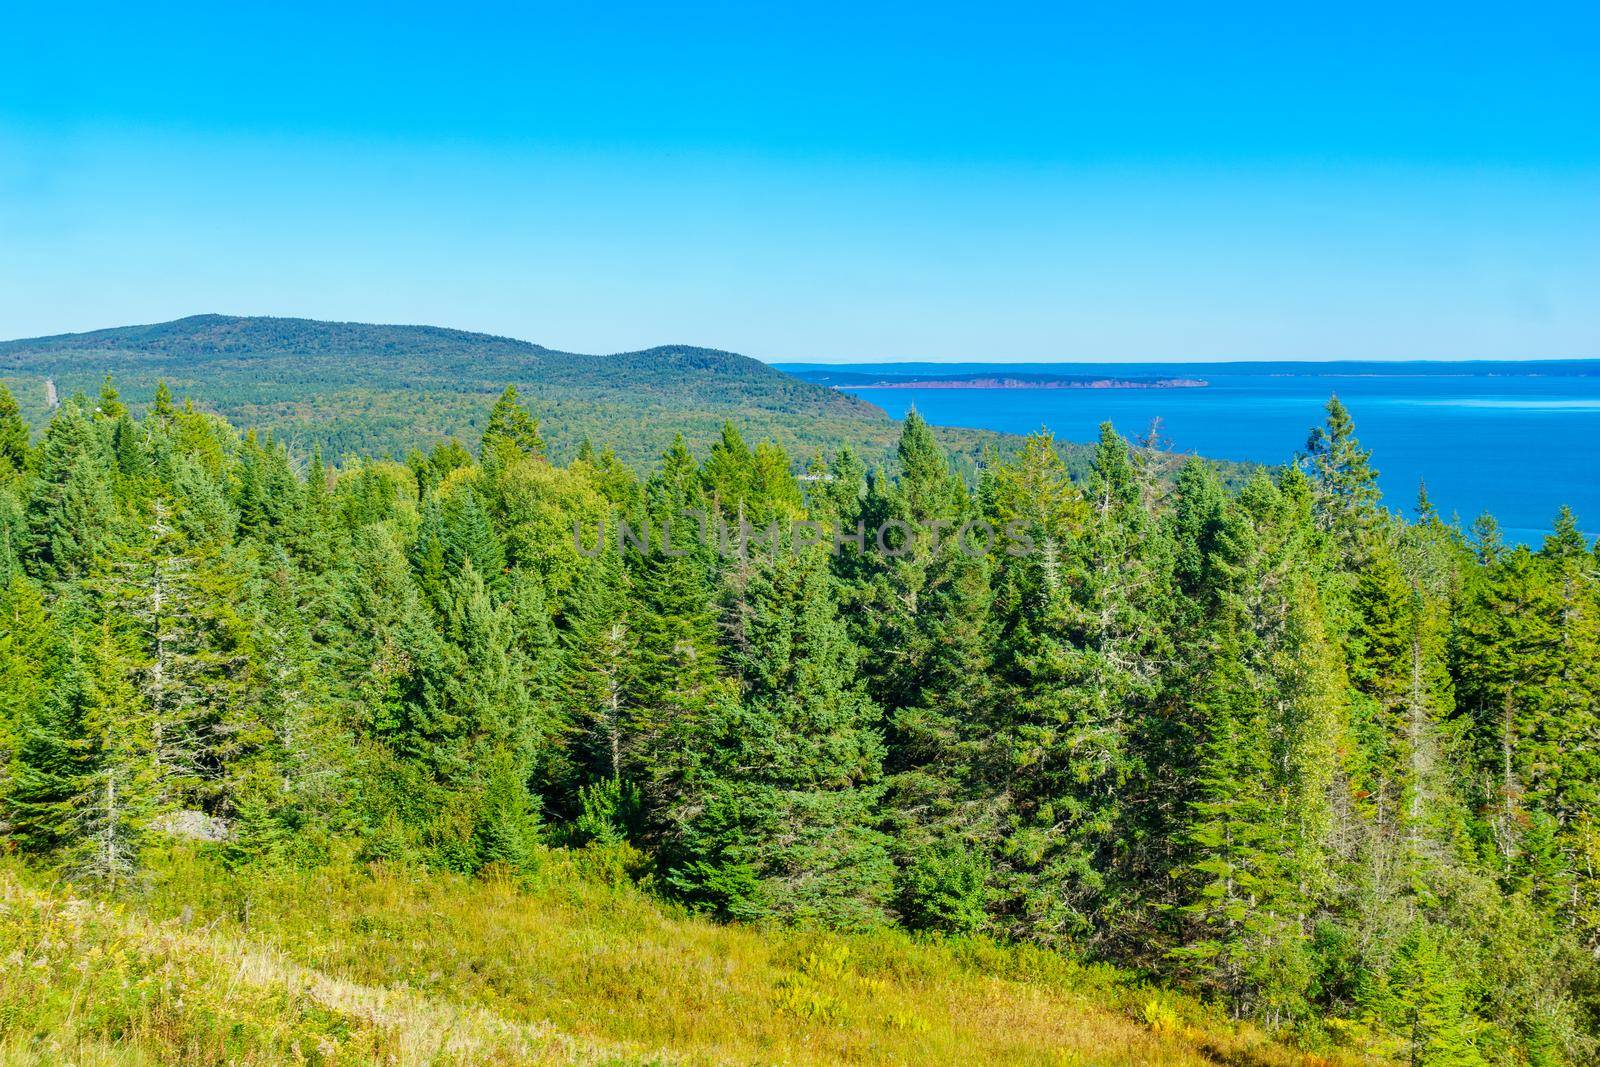 View of trees and landscape in Fundy National Park, New Brunswick, Canada